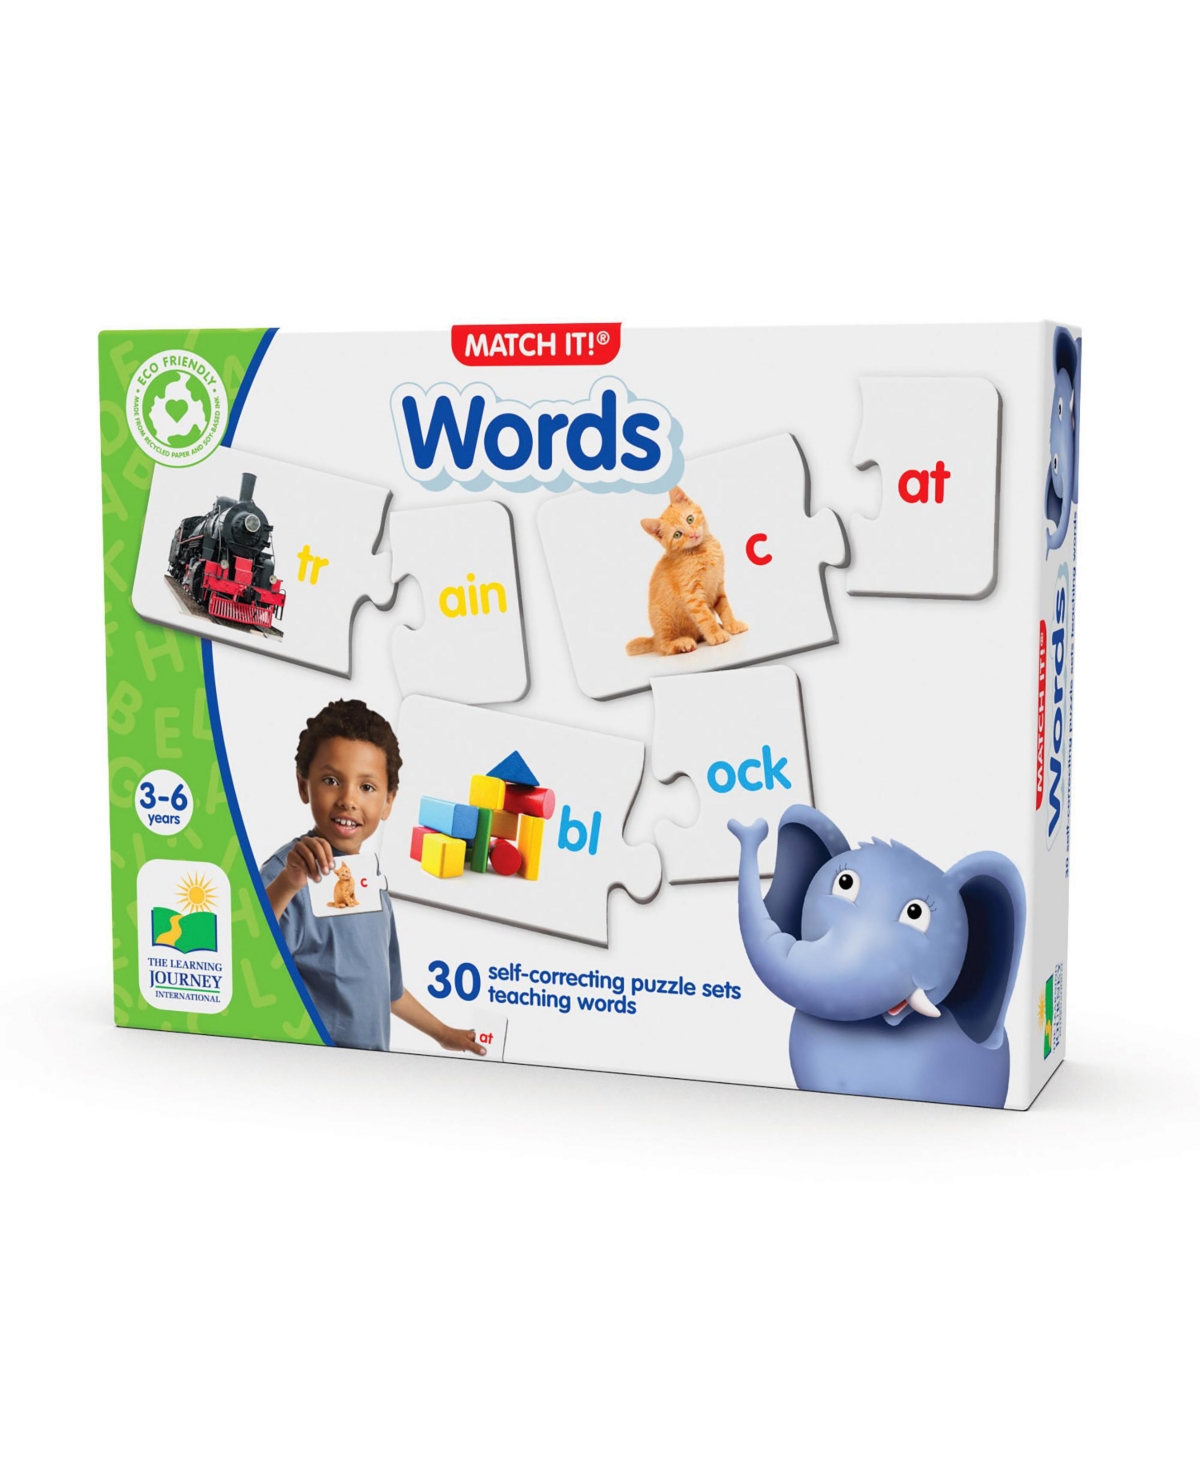 The Learning Journey Babies' Match It Words Set Of 30 Self-correcting Reading Puzzle Match The Words To Images In Multi Colored